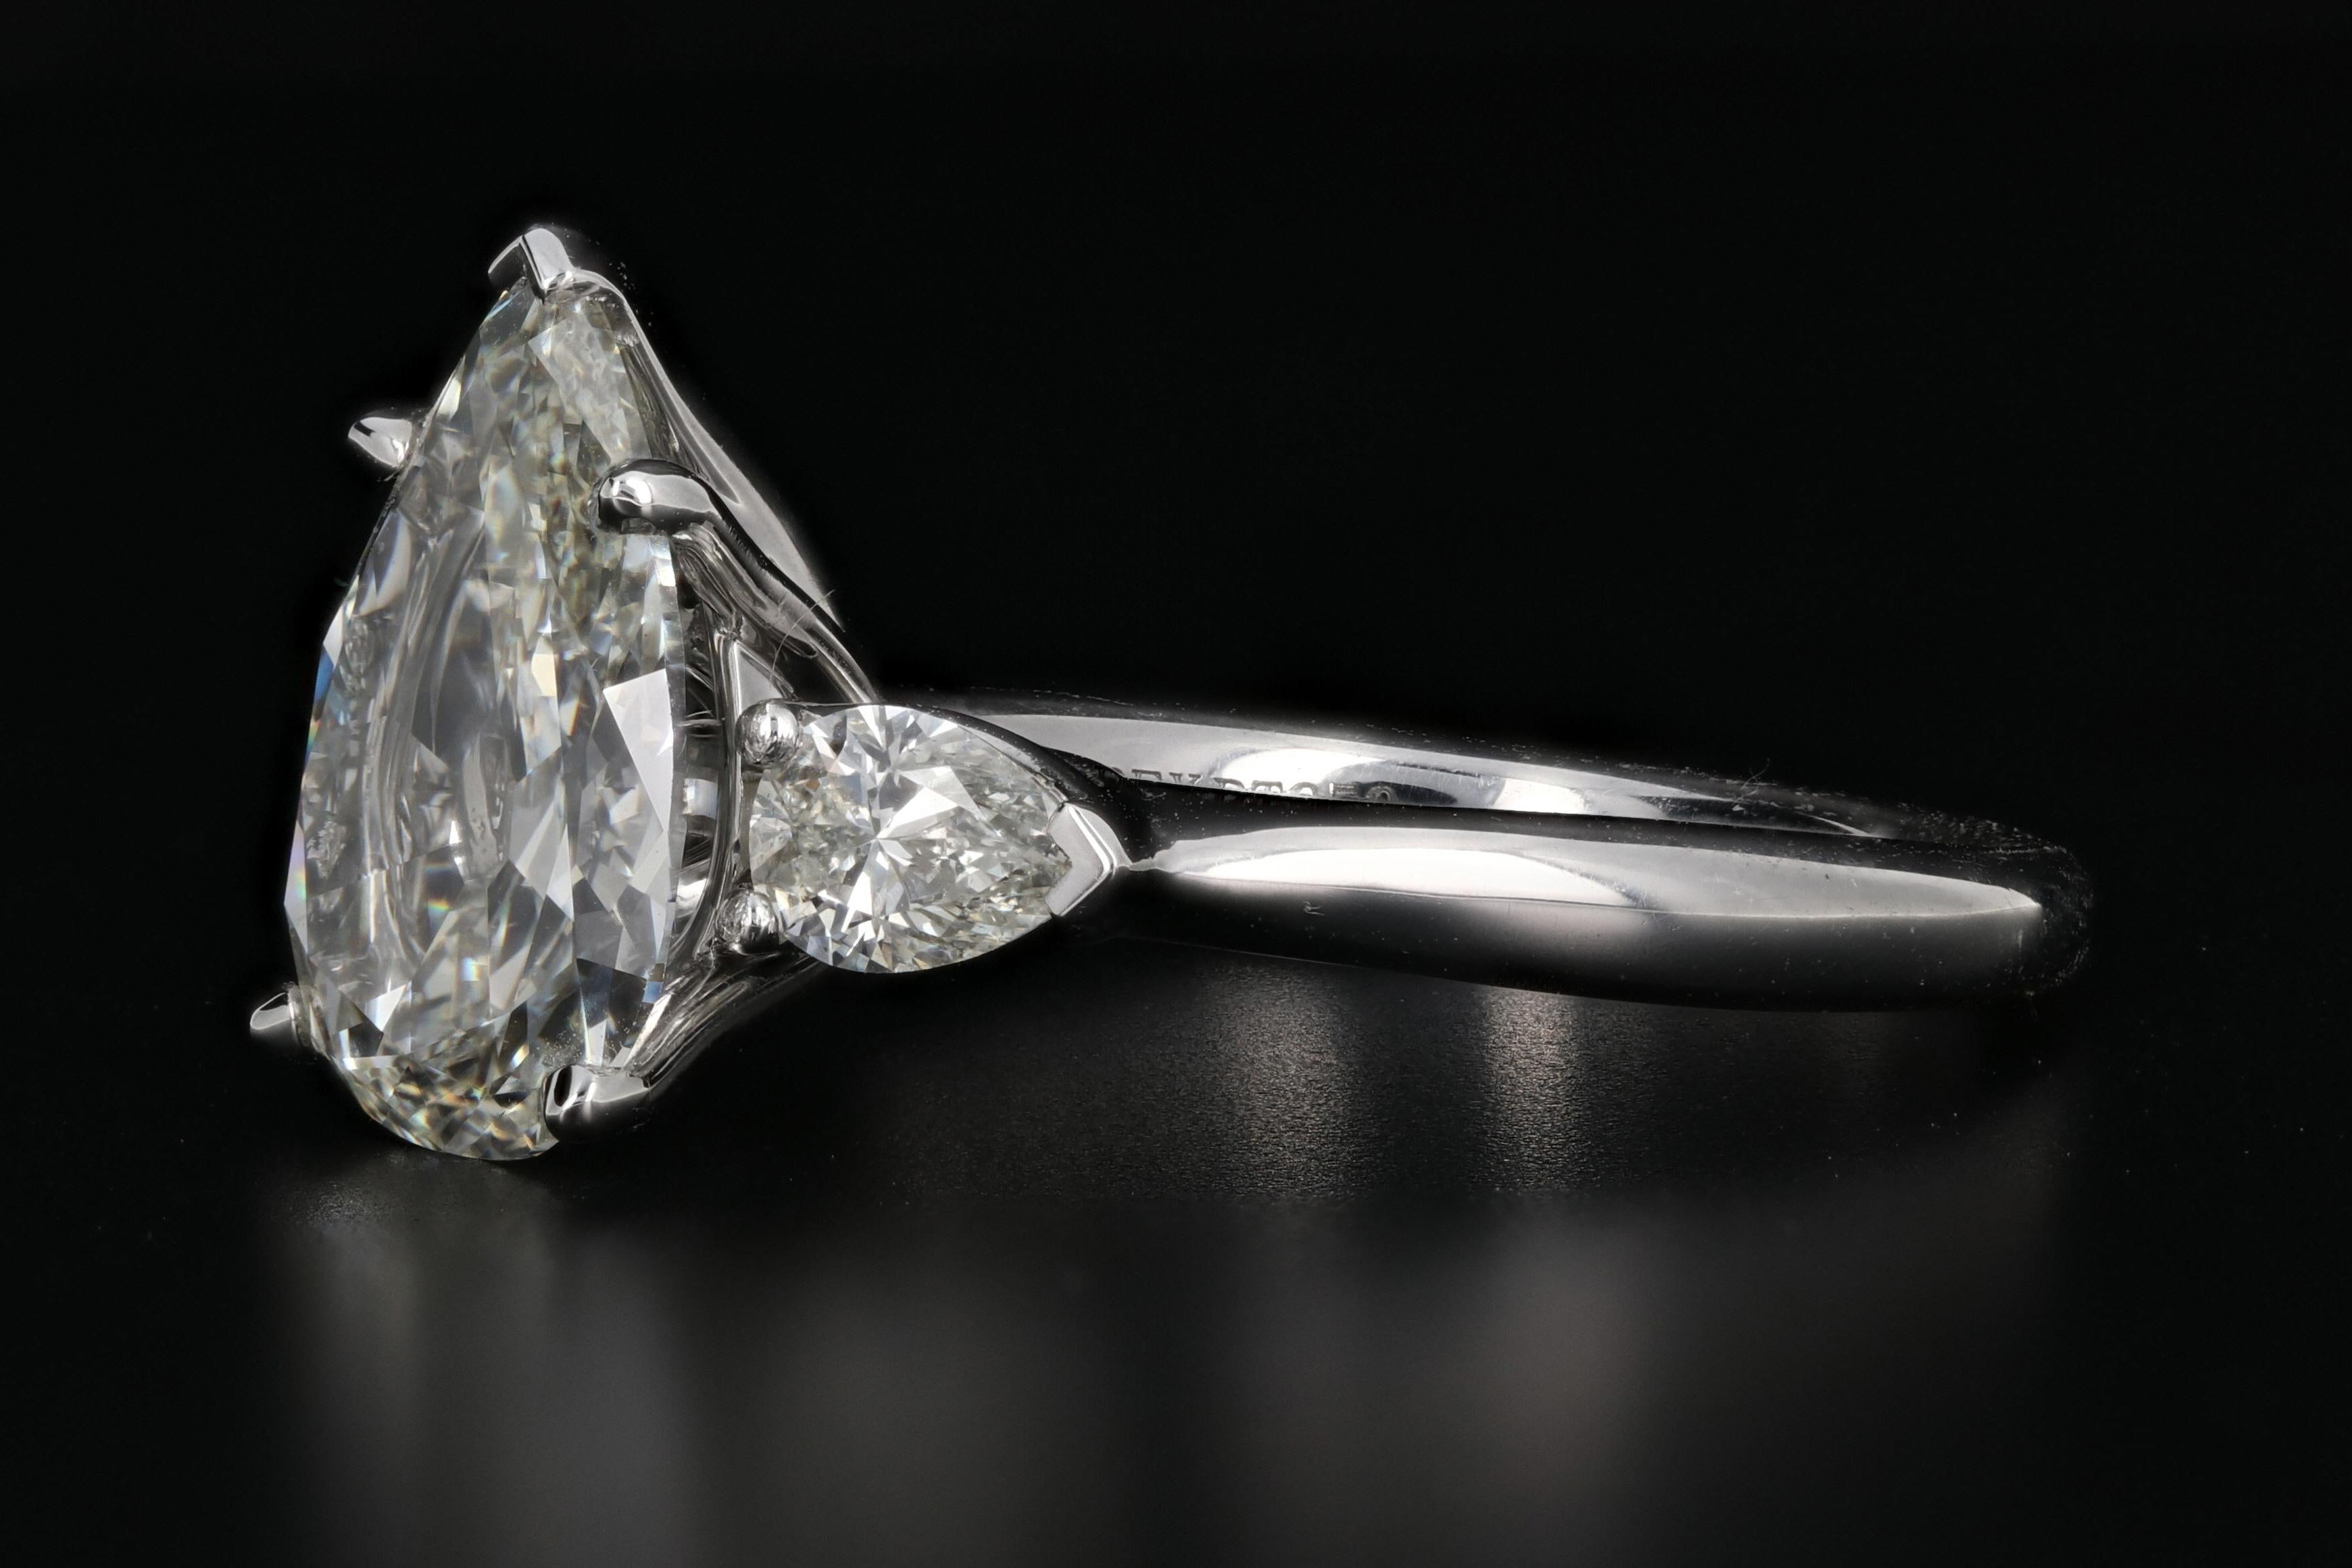 Hallmarks: APEX PT950

Primary Stone: Pear Cut Diamond

Diamond Measurements: 13 x 9.3 x 3.9mm

Carat Weight: 3 carats total

Color/Clarity: J/K - Vs1/2

Size: 6.75

Weight: 8.24 Grams

Hight off Finger: 8.65mm

Ring Width: 13.48mm

Condition: